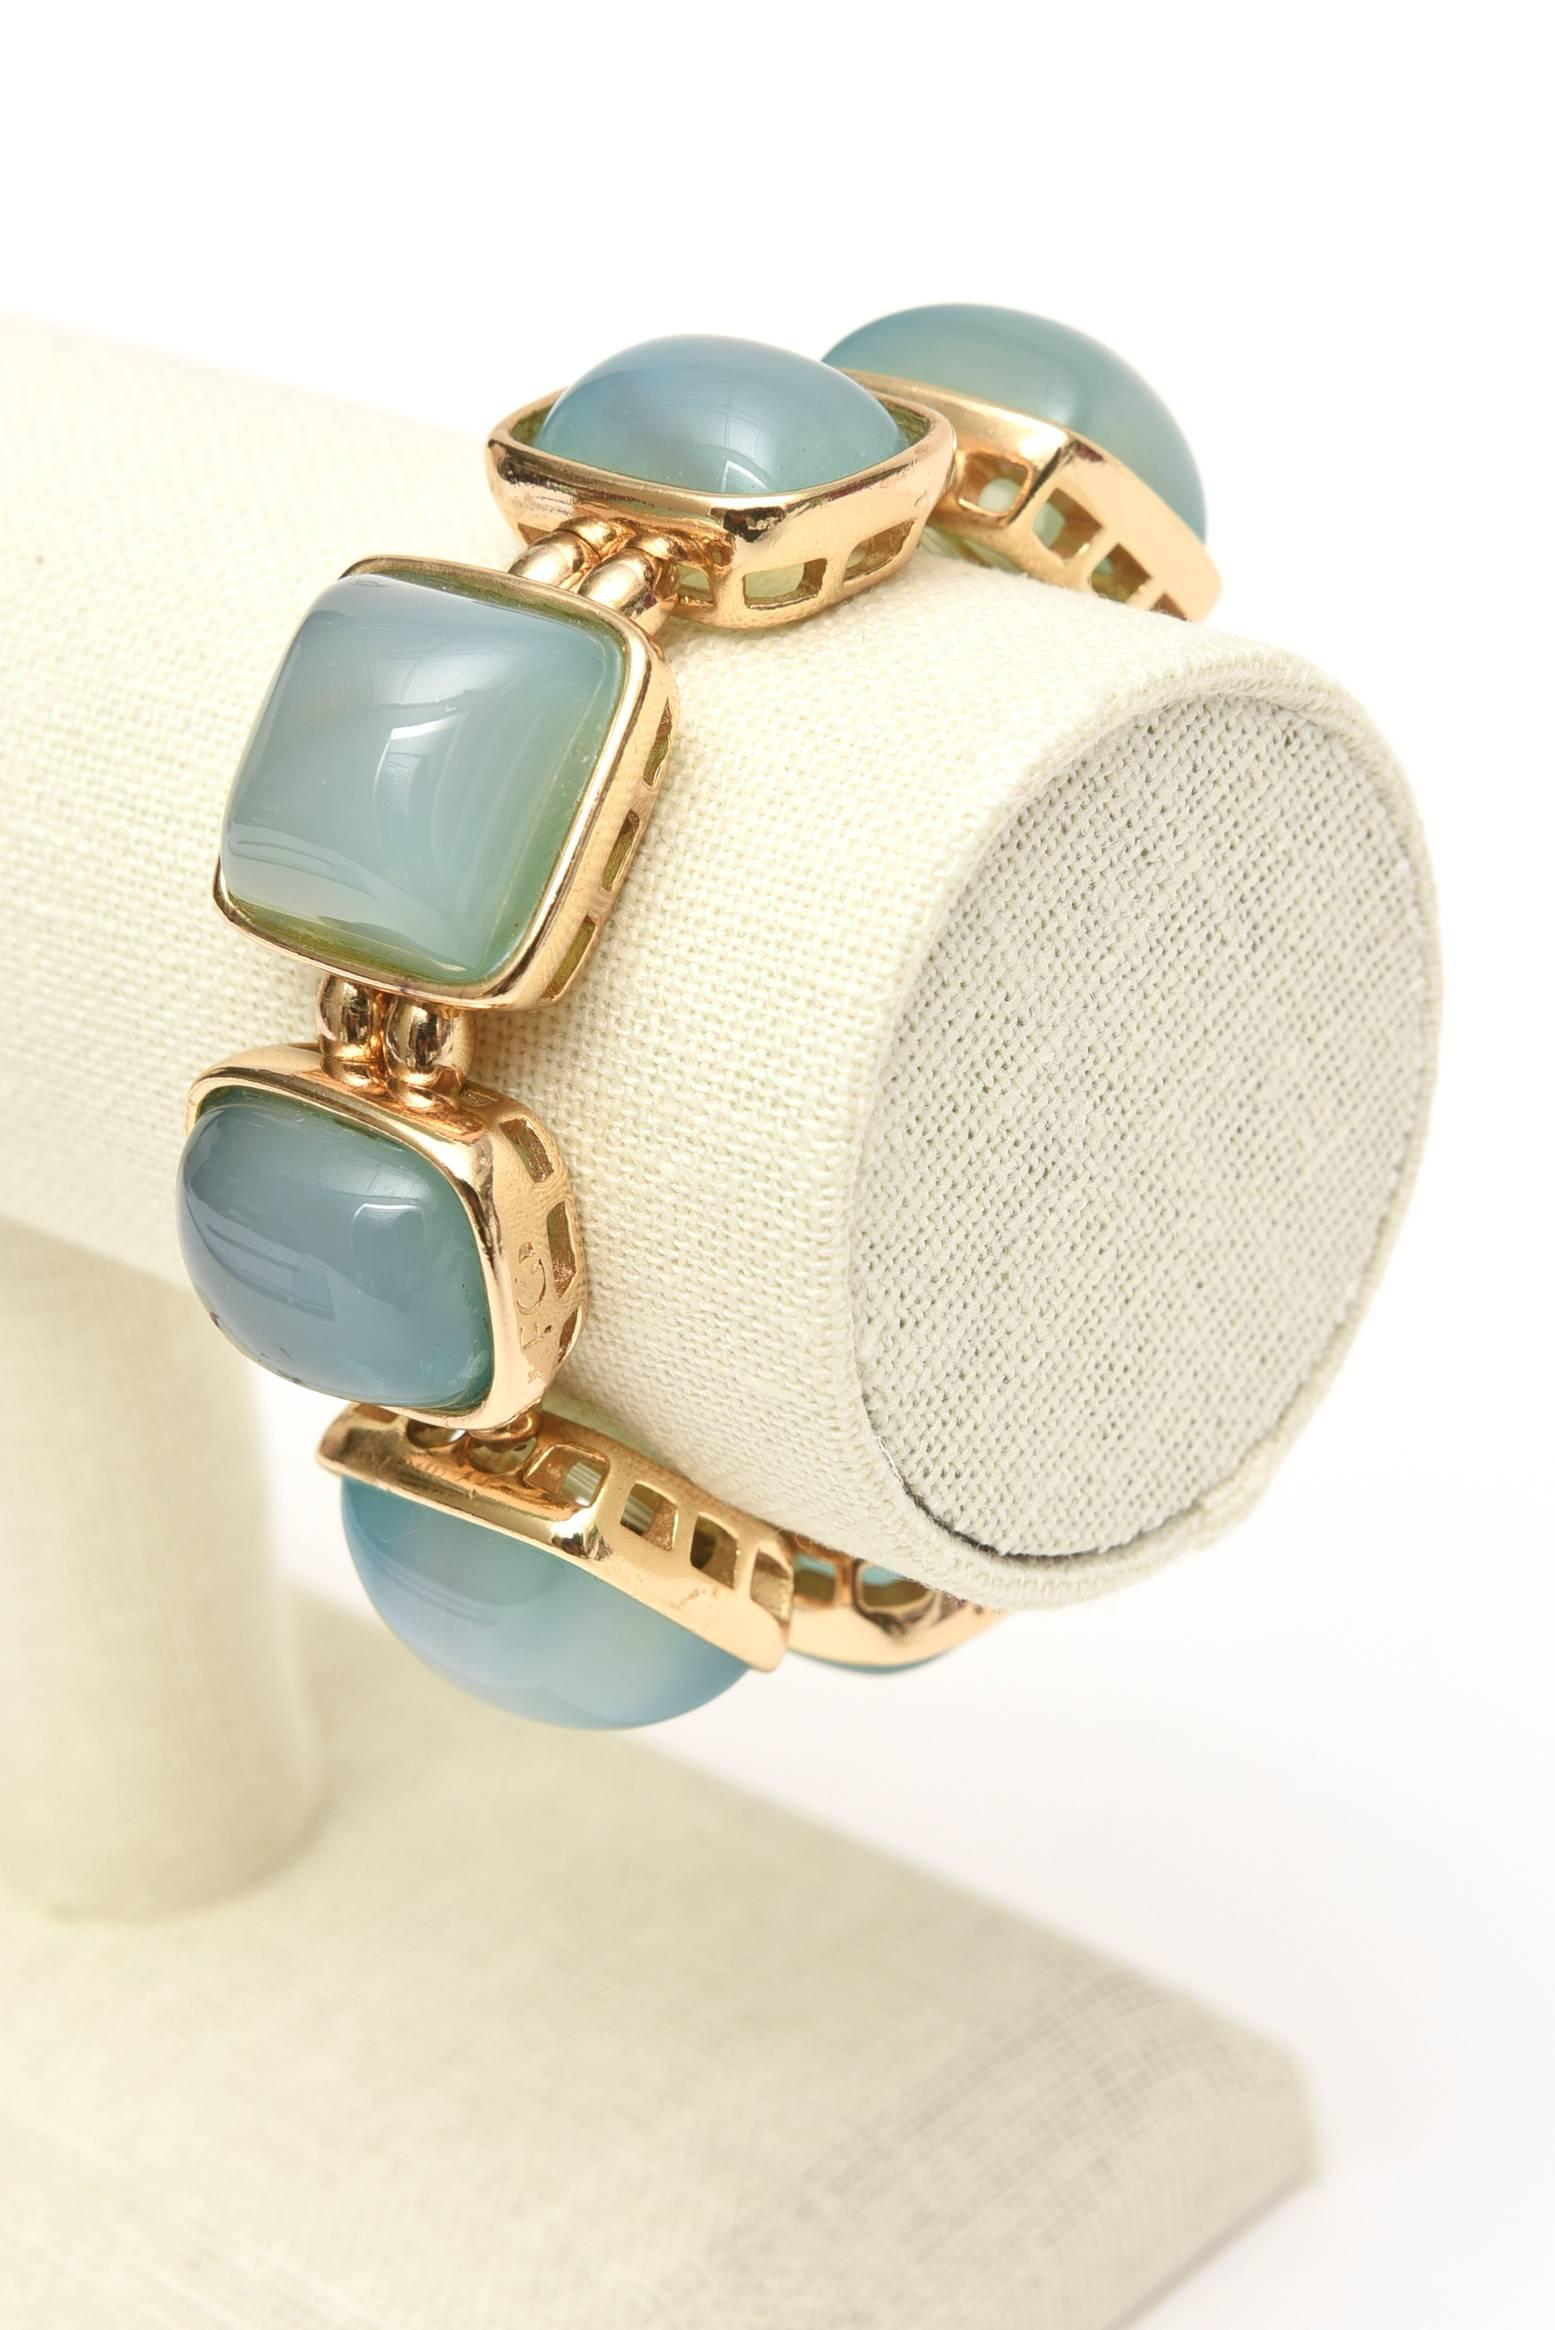 Set of Cabochon Chalcedony 24 Gold Plated Bracelet and Earrings SAT. SALE 5